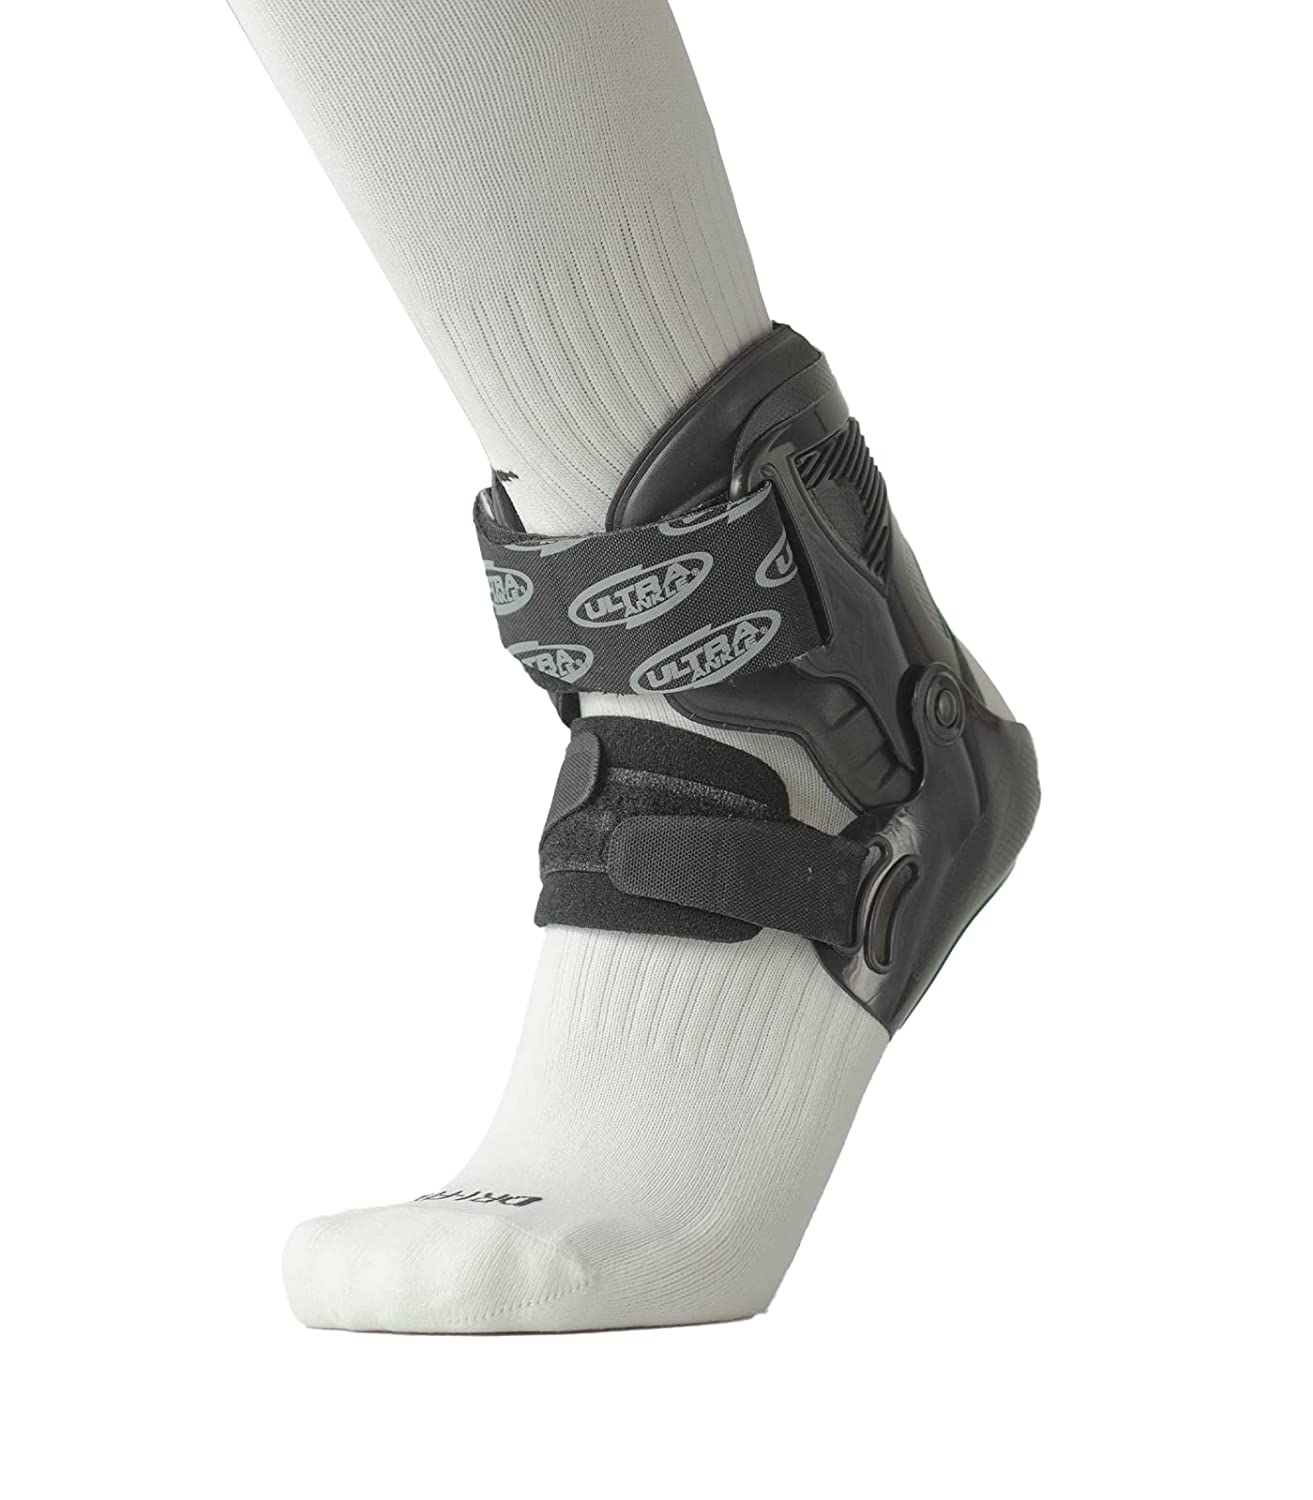 Ultra Ankle® Ultra Zoom® Hinged-Cuff Ankle Brace S/M - image 1 of 6